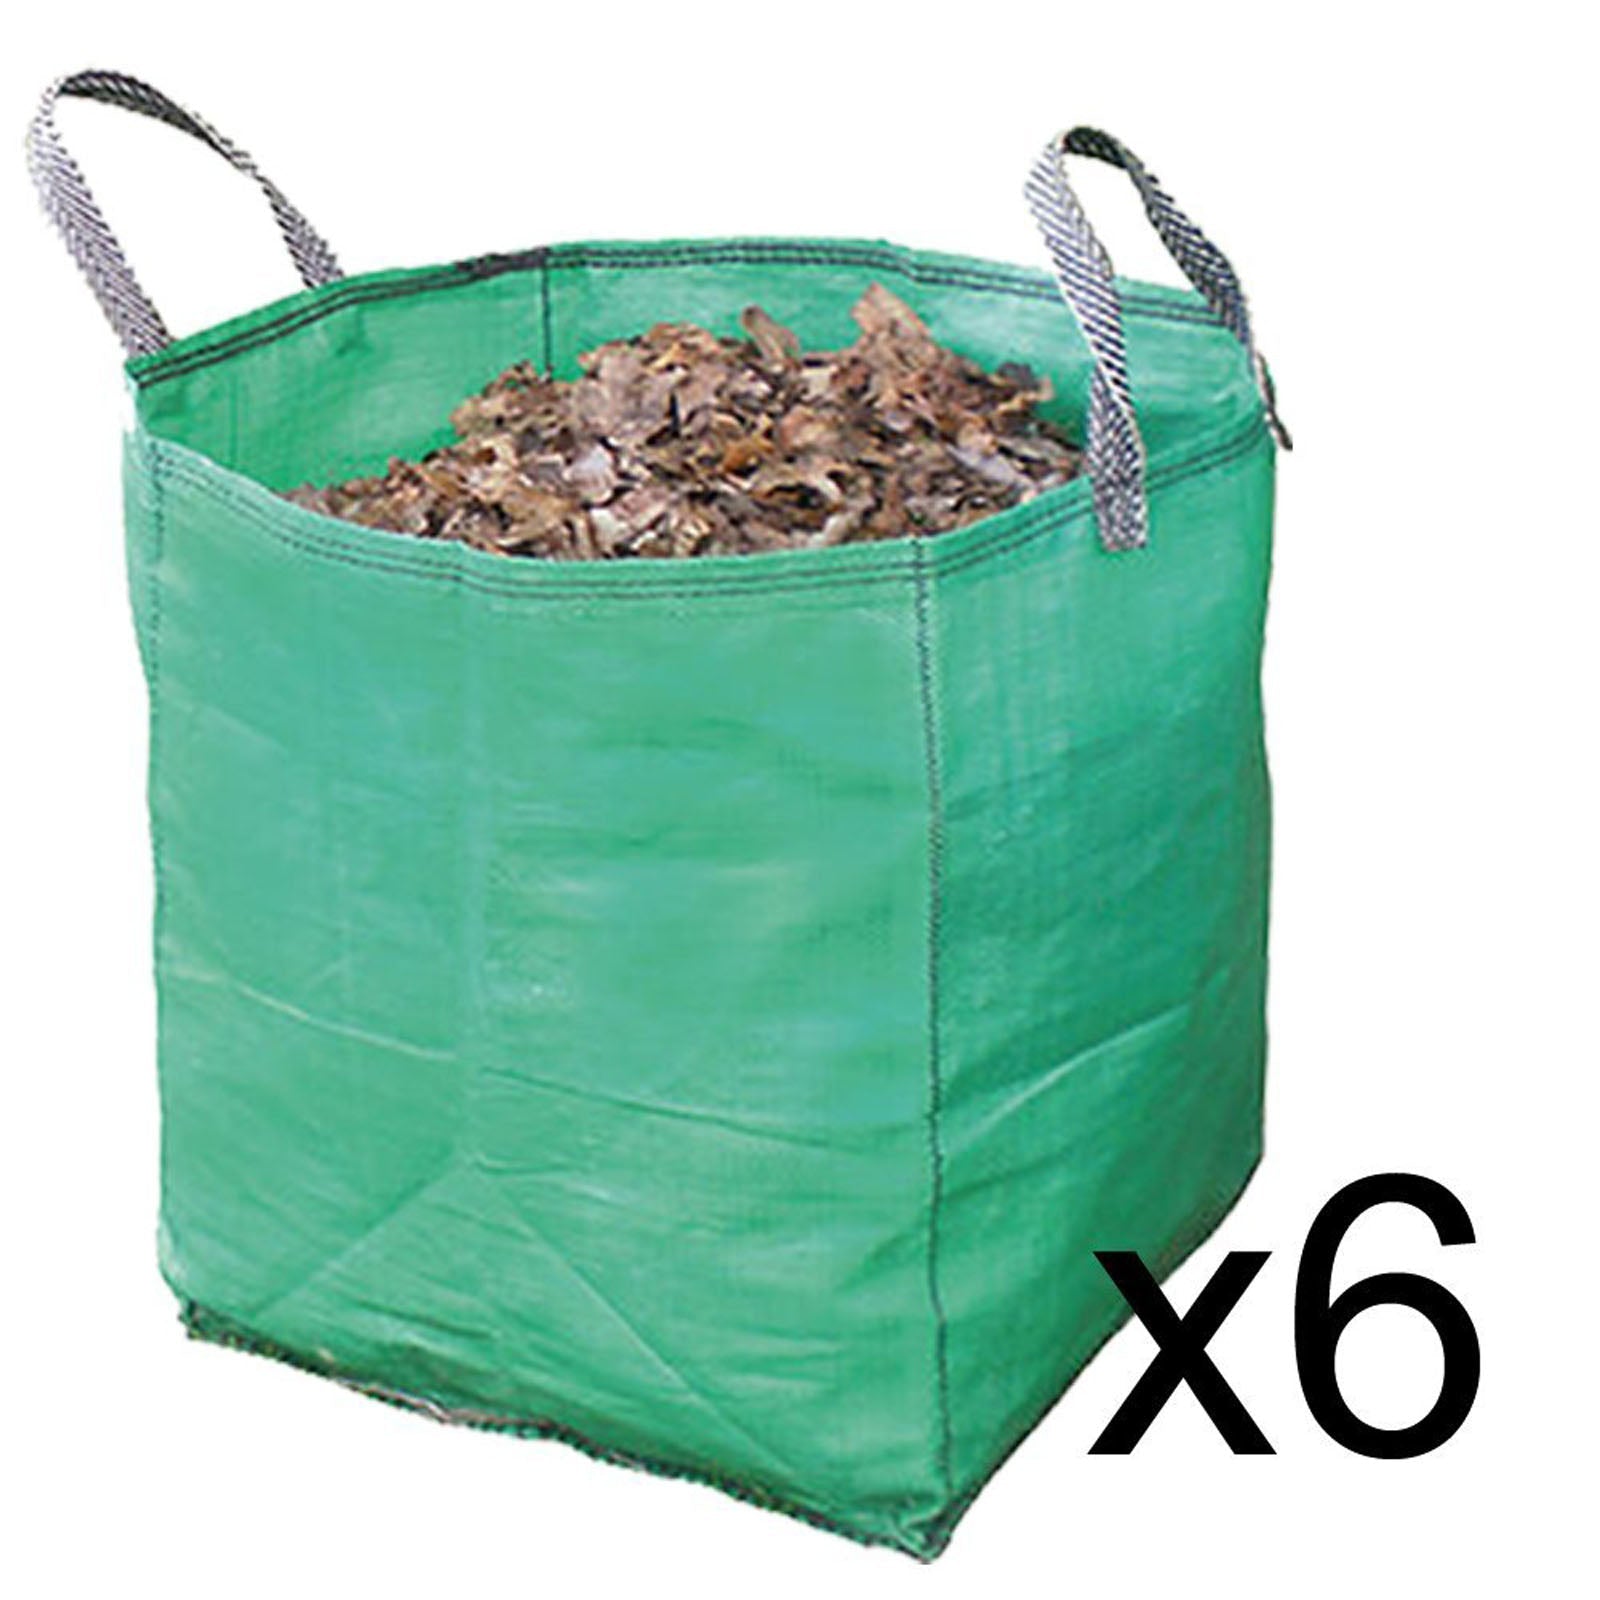 Large Garden Waste Recycling Tip Bags Heavy Duty Non Tear Woven Plastic Sack x 6